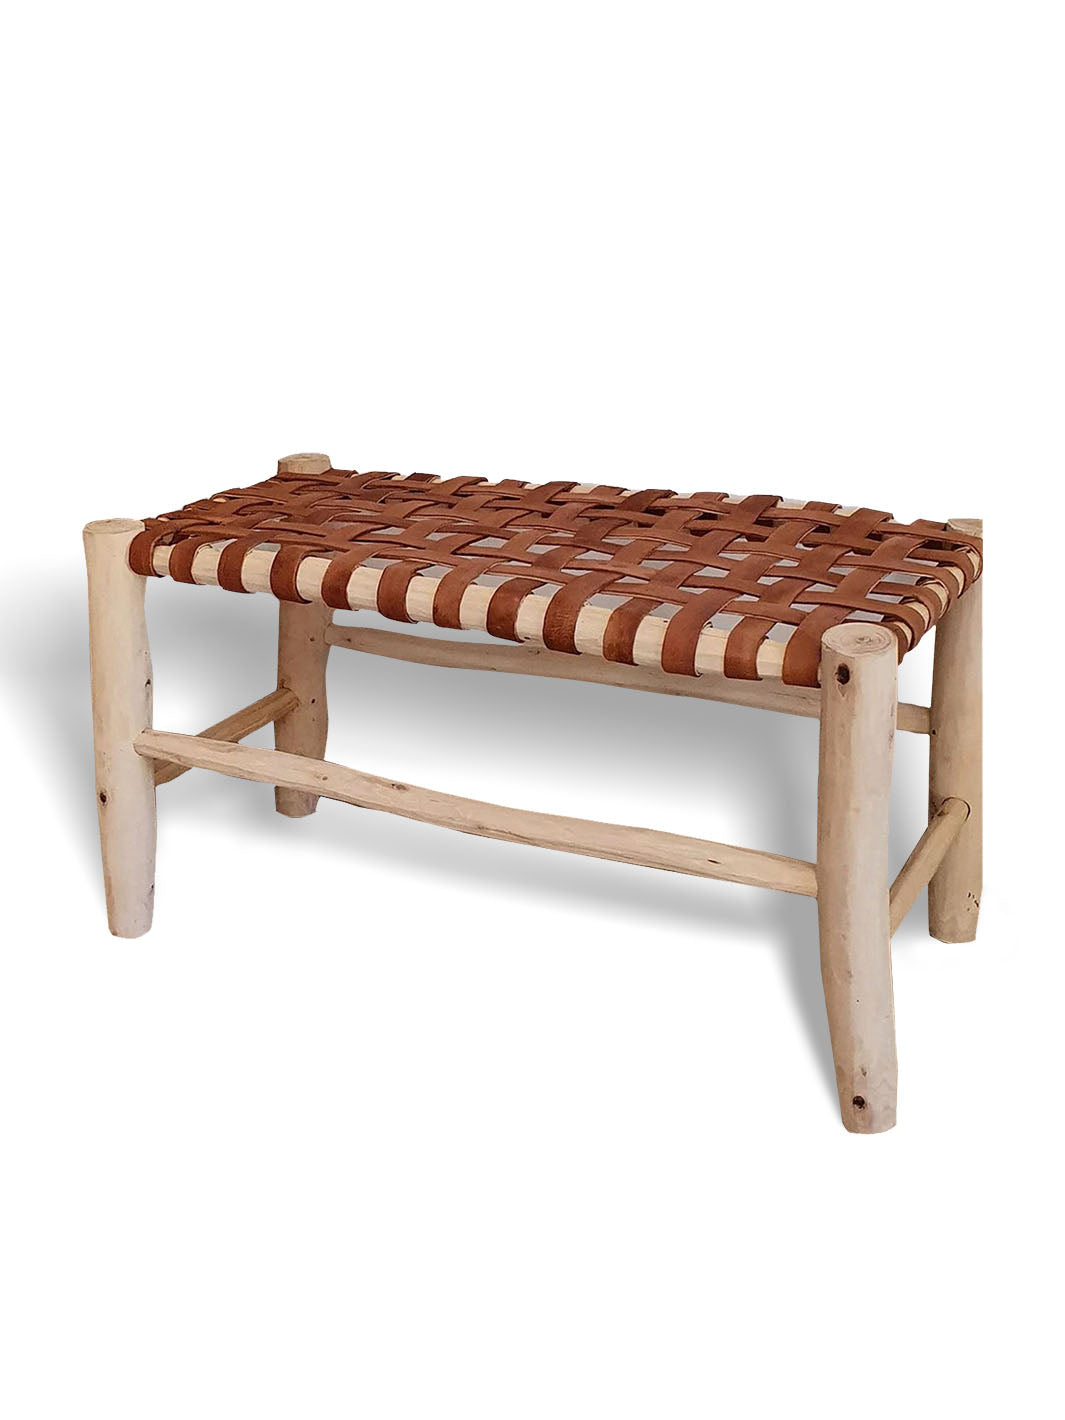 Handcrafted Moroccan Wooden Bench w/ Braided Leather Libitii Benches LIB-0161